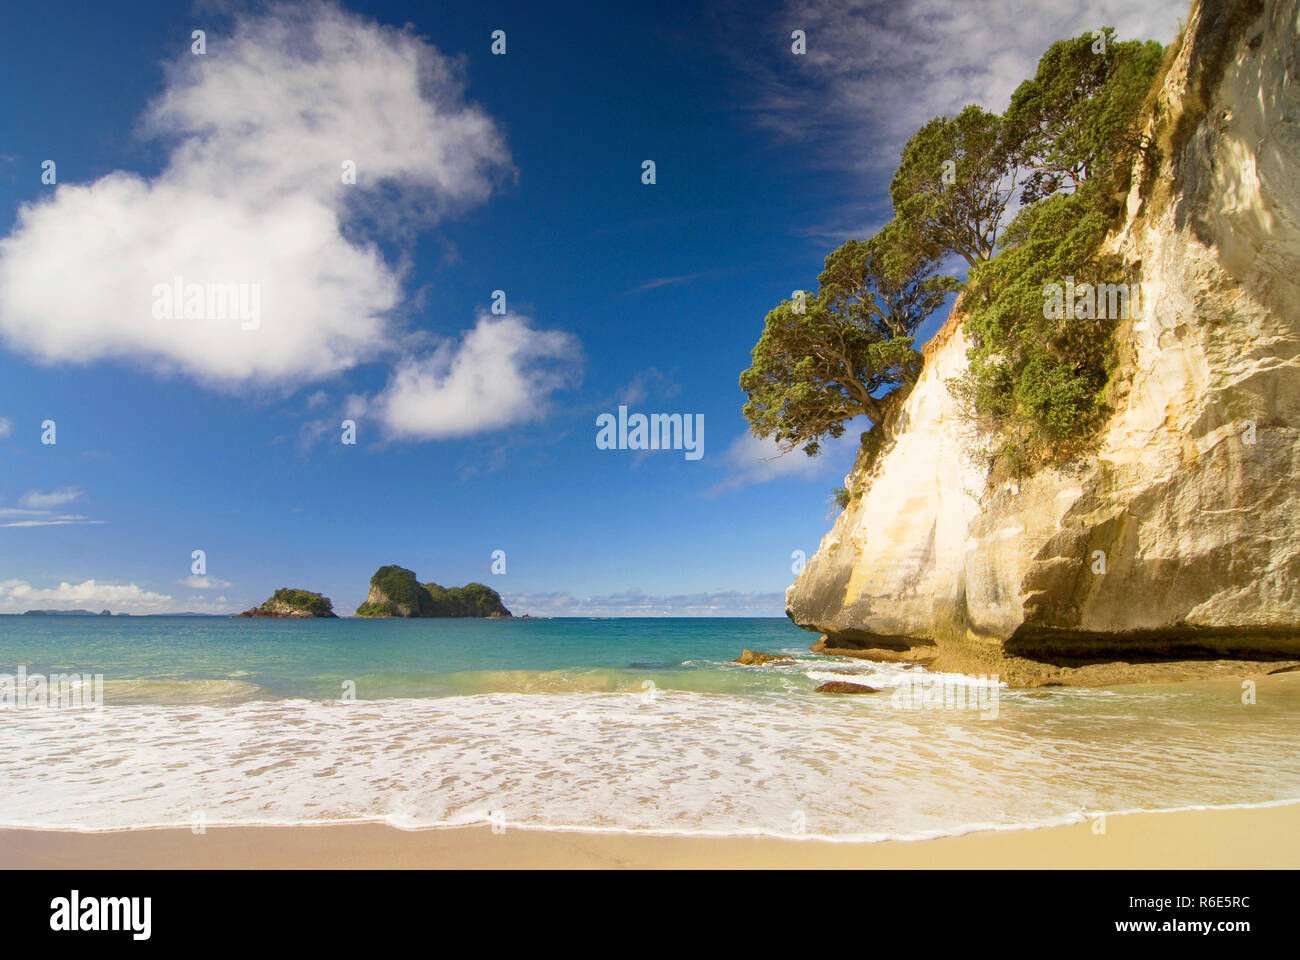 White Limestone Rock Formations And Fine Sandy Beach At Cathedral Cove On The Coromandel Peninsula In New Zealand, North Island Stock Photo